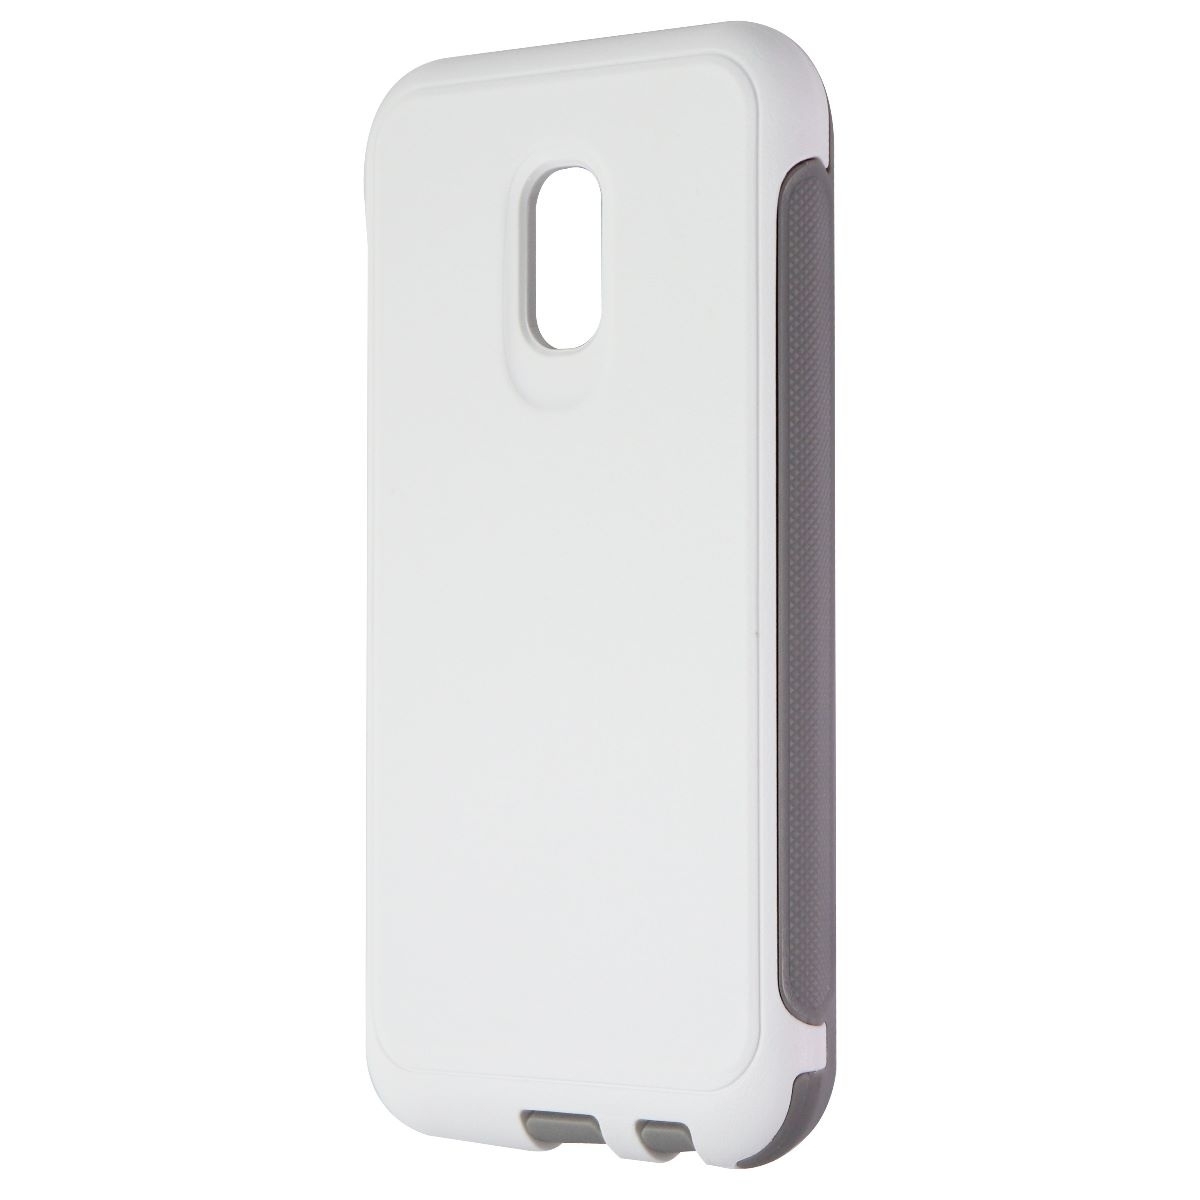 Verizon Rugged Series Dual Layer Case For ASUS ZenFone V Live - White / Gray